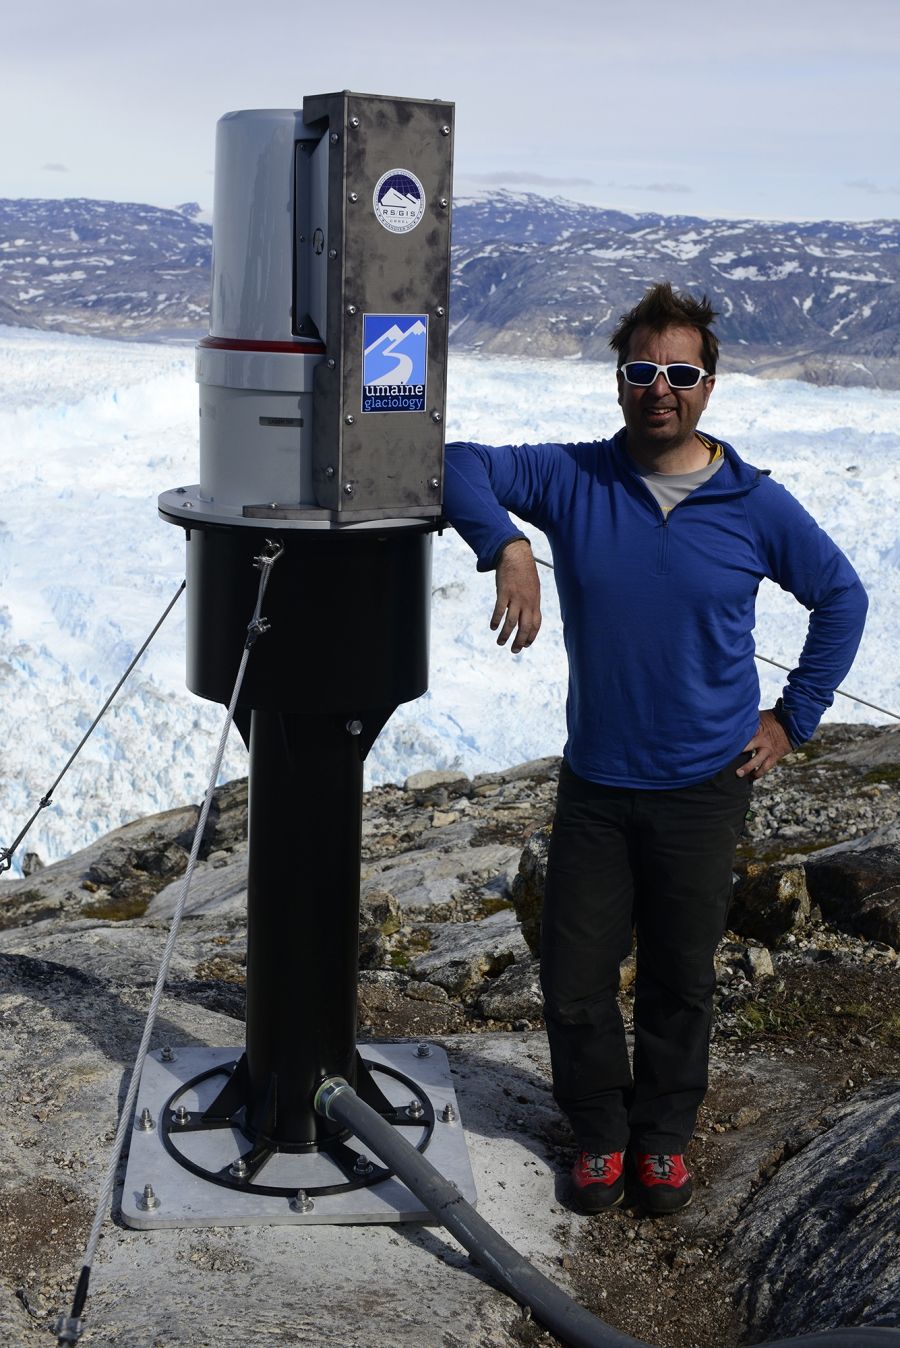 “We didn’t anticipate the changes that happened (in Greenland) in the last ten or 15 years,” says glaciologist Gordon Hamilton. “The ice sheet has waxed and waned with time for sure, but I don’t think it’s been through such a large set of changes in such a short period of time.” Hamilton hopes the new high-definition laser scanner he and his colleagues have just installed on the rim of Greenland's Helheim glacier will help keep pace better with the rapid changes in the region. Greenland, 2015. Image by Ari 